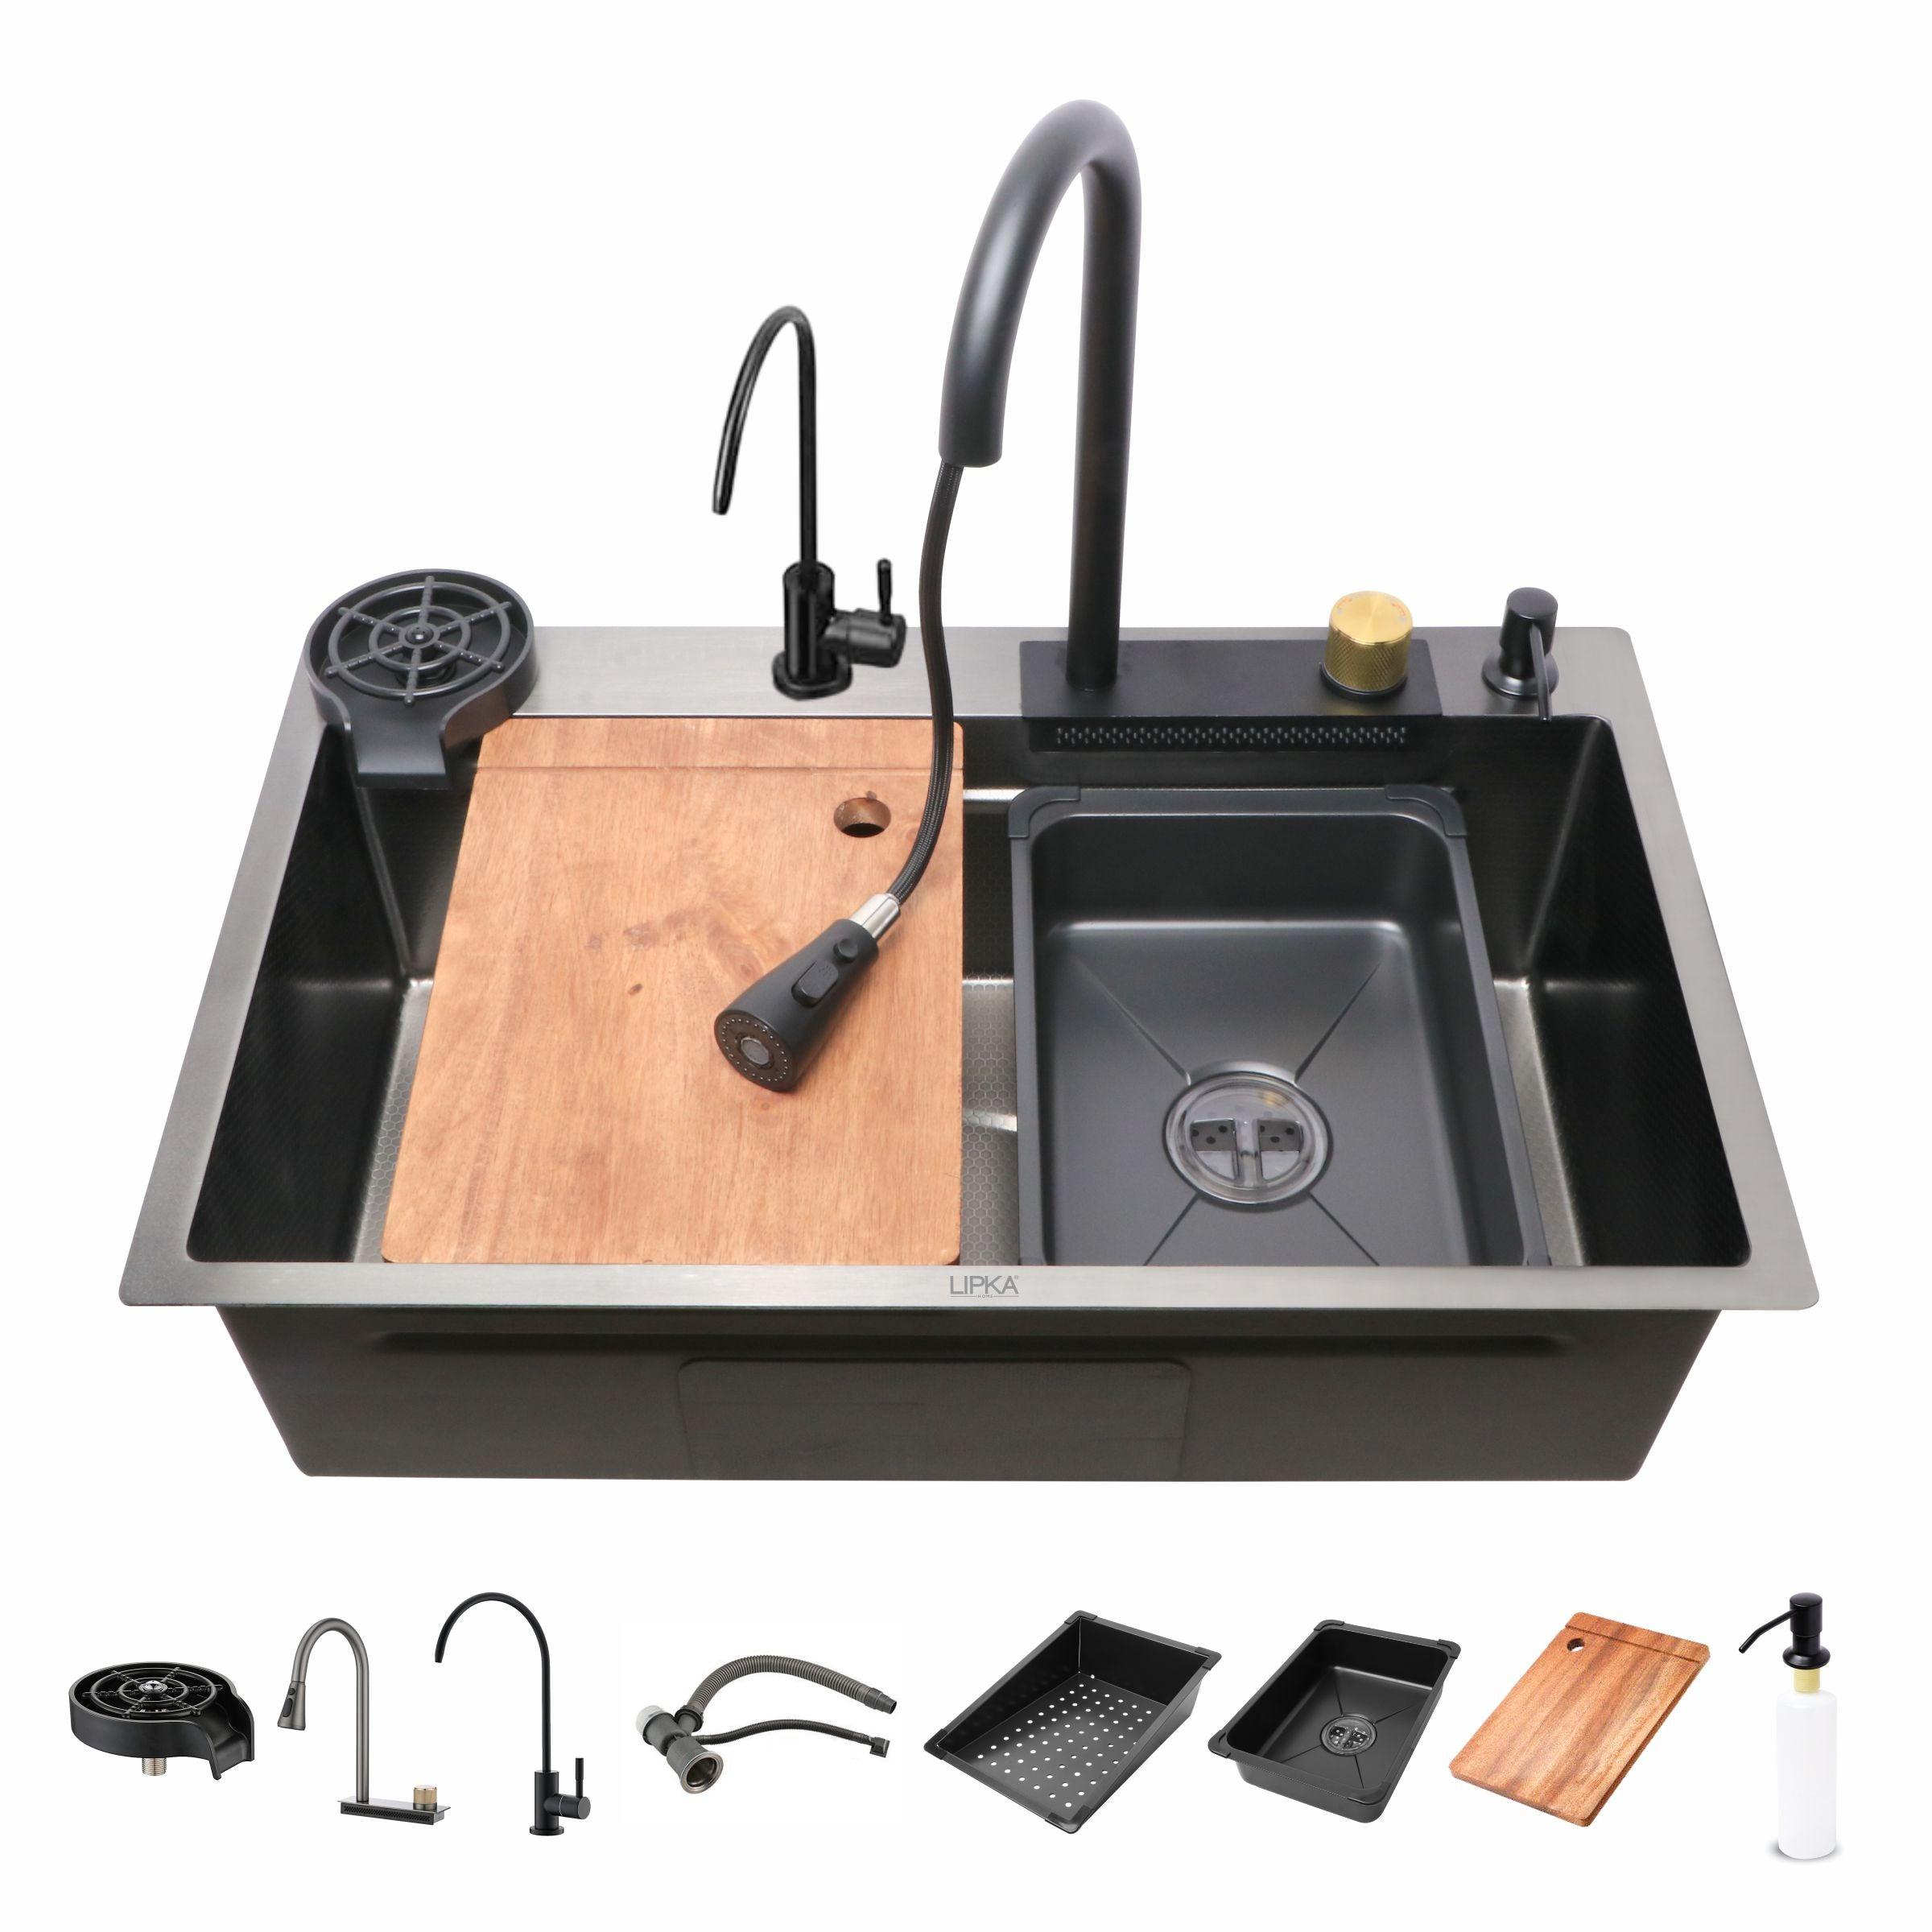 Handmade Nano Waterfall Kitchen Sink (30 x 18 x 9 inches) with Pull-out Mixer Faucet & RO Tap - LIPKA - Lipka Home